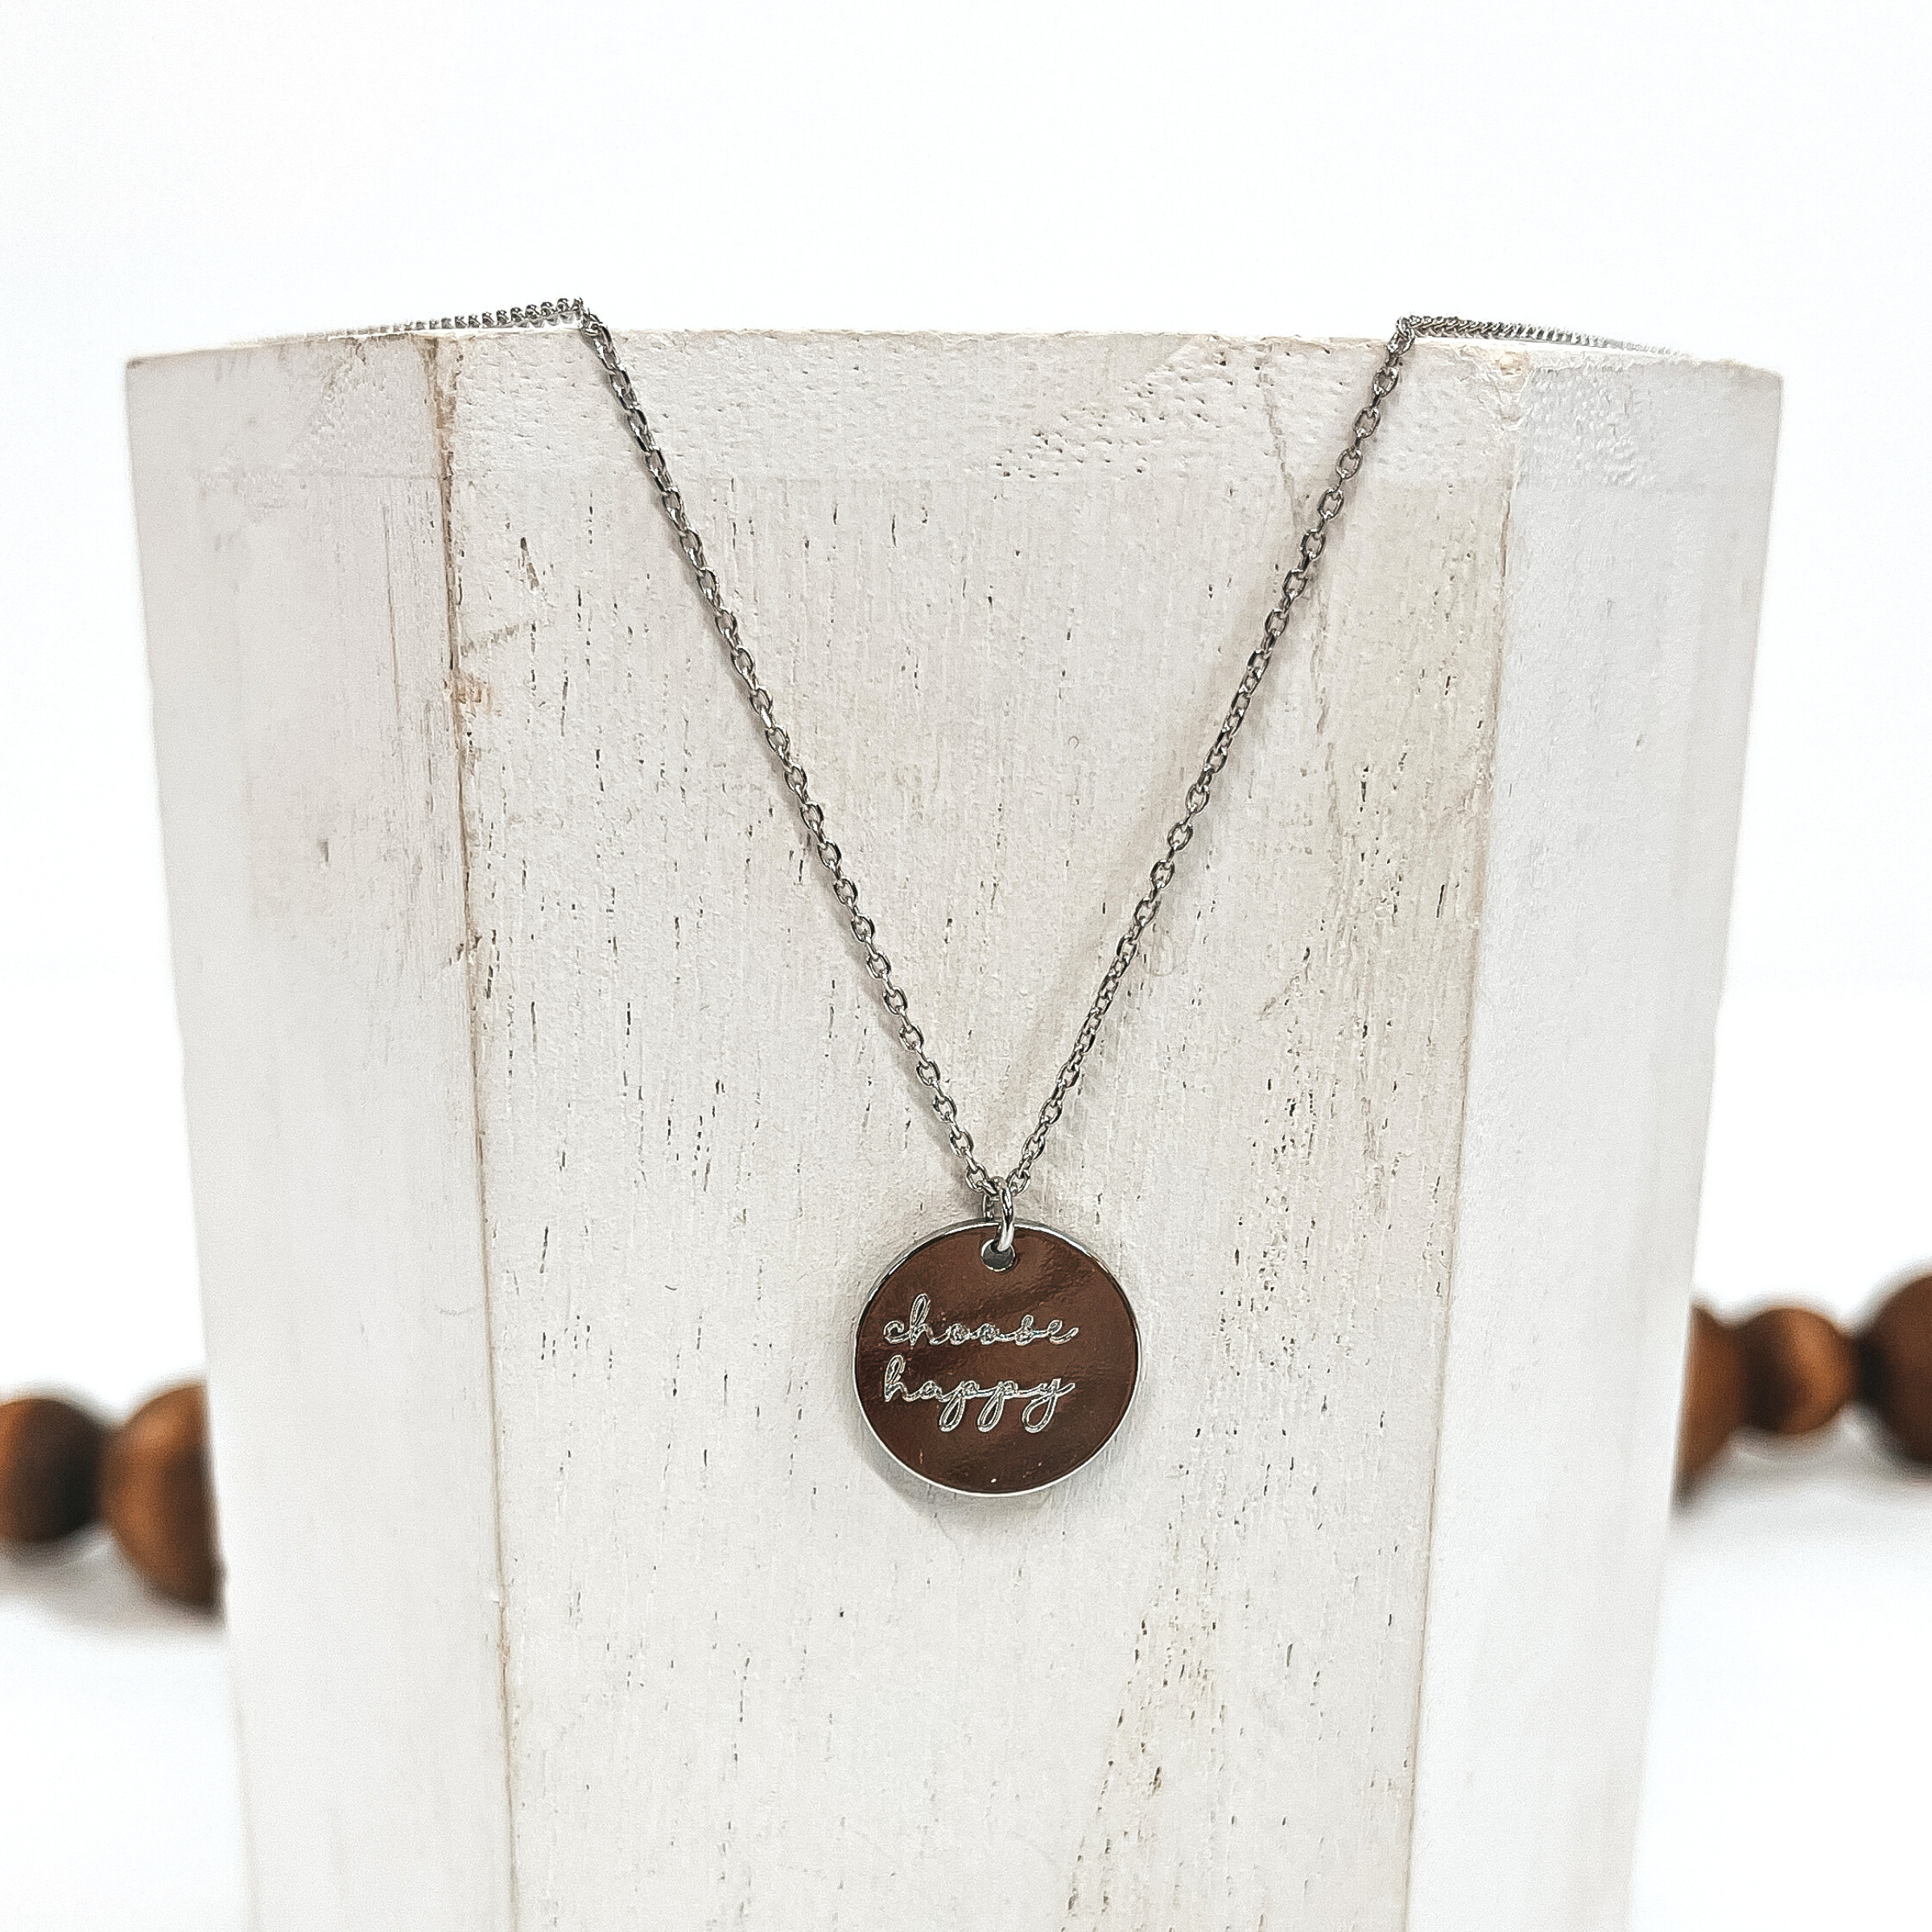 This is a thin silver necklace with a silver pendant that says, 'choose happy'.  This necklace is taken on a white block and on a white background with brown  beads in the back as decor.